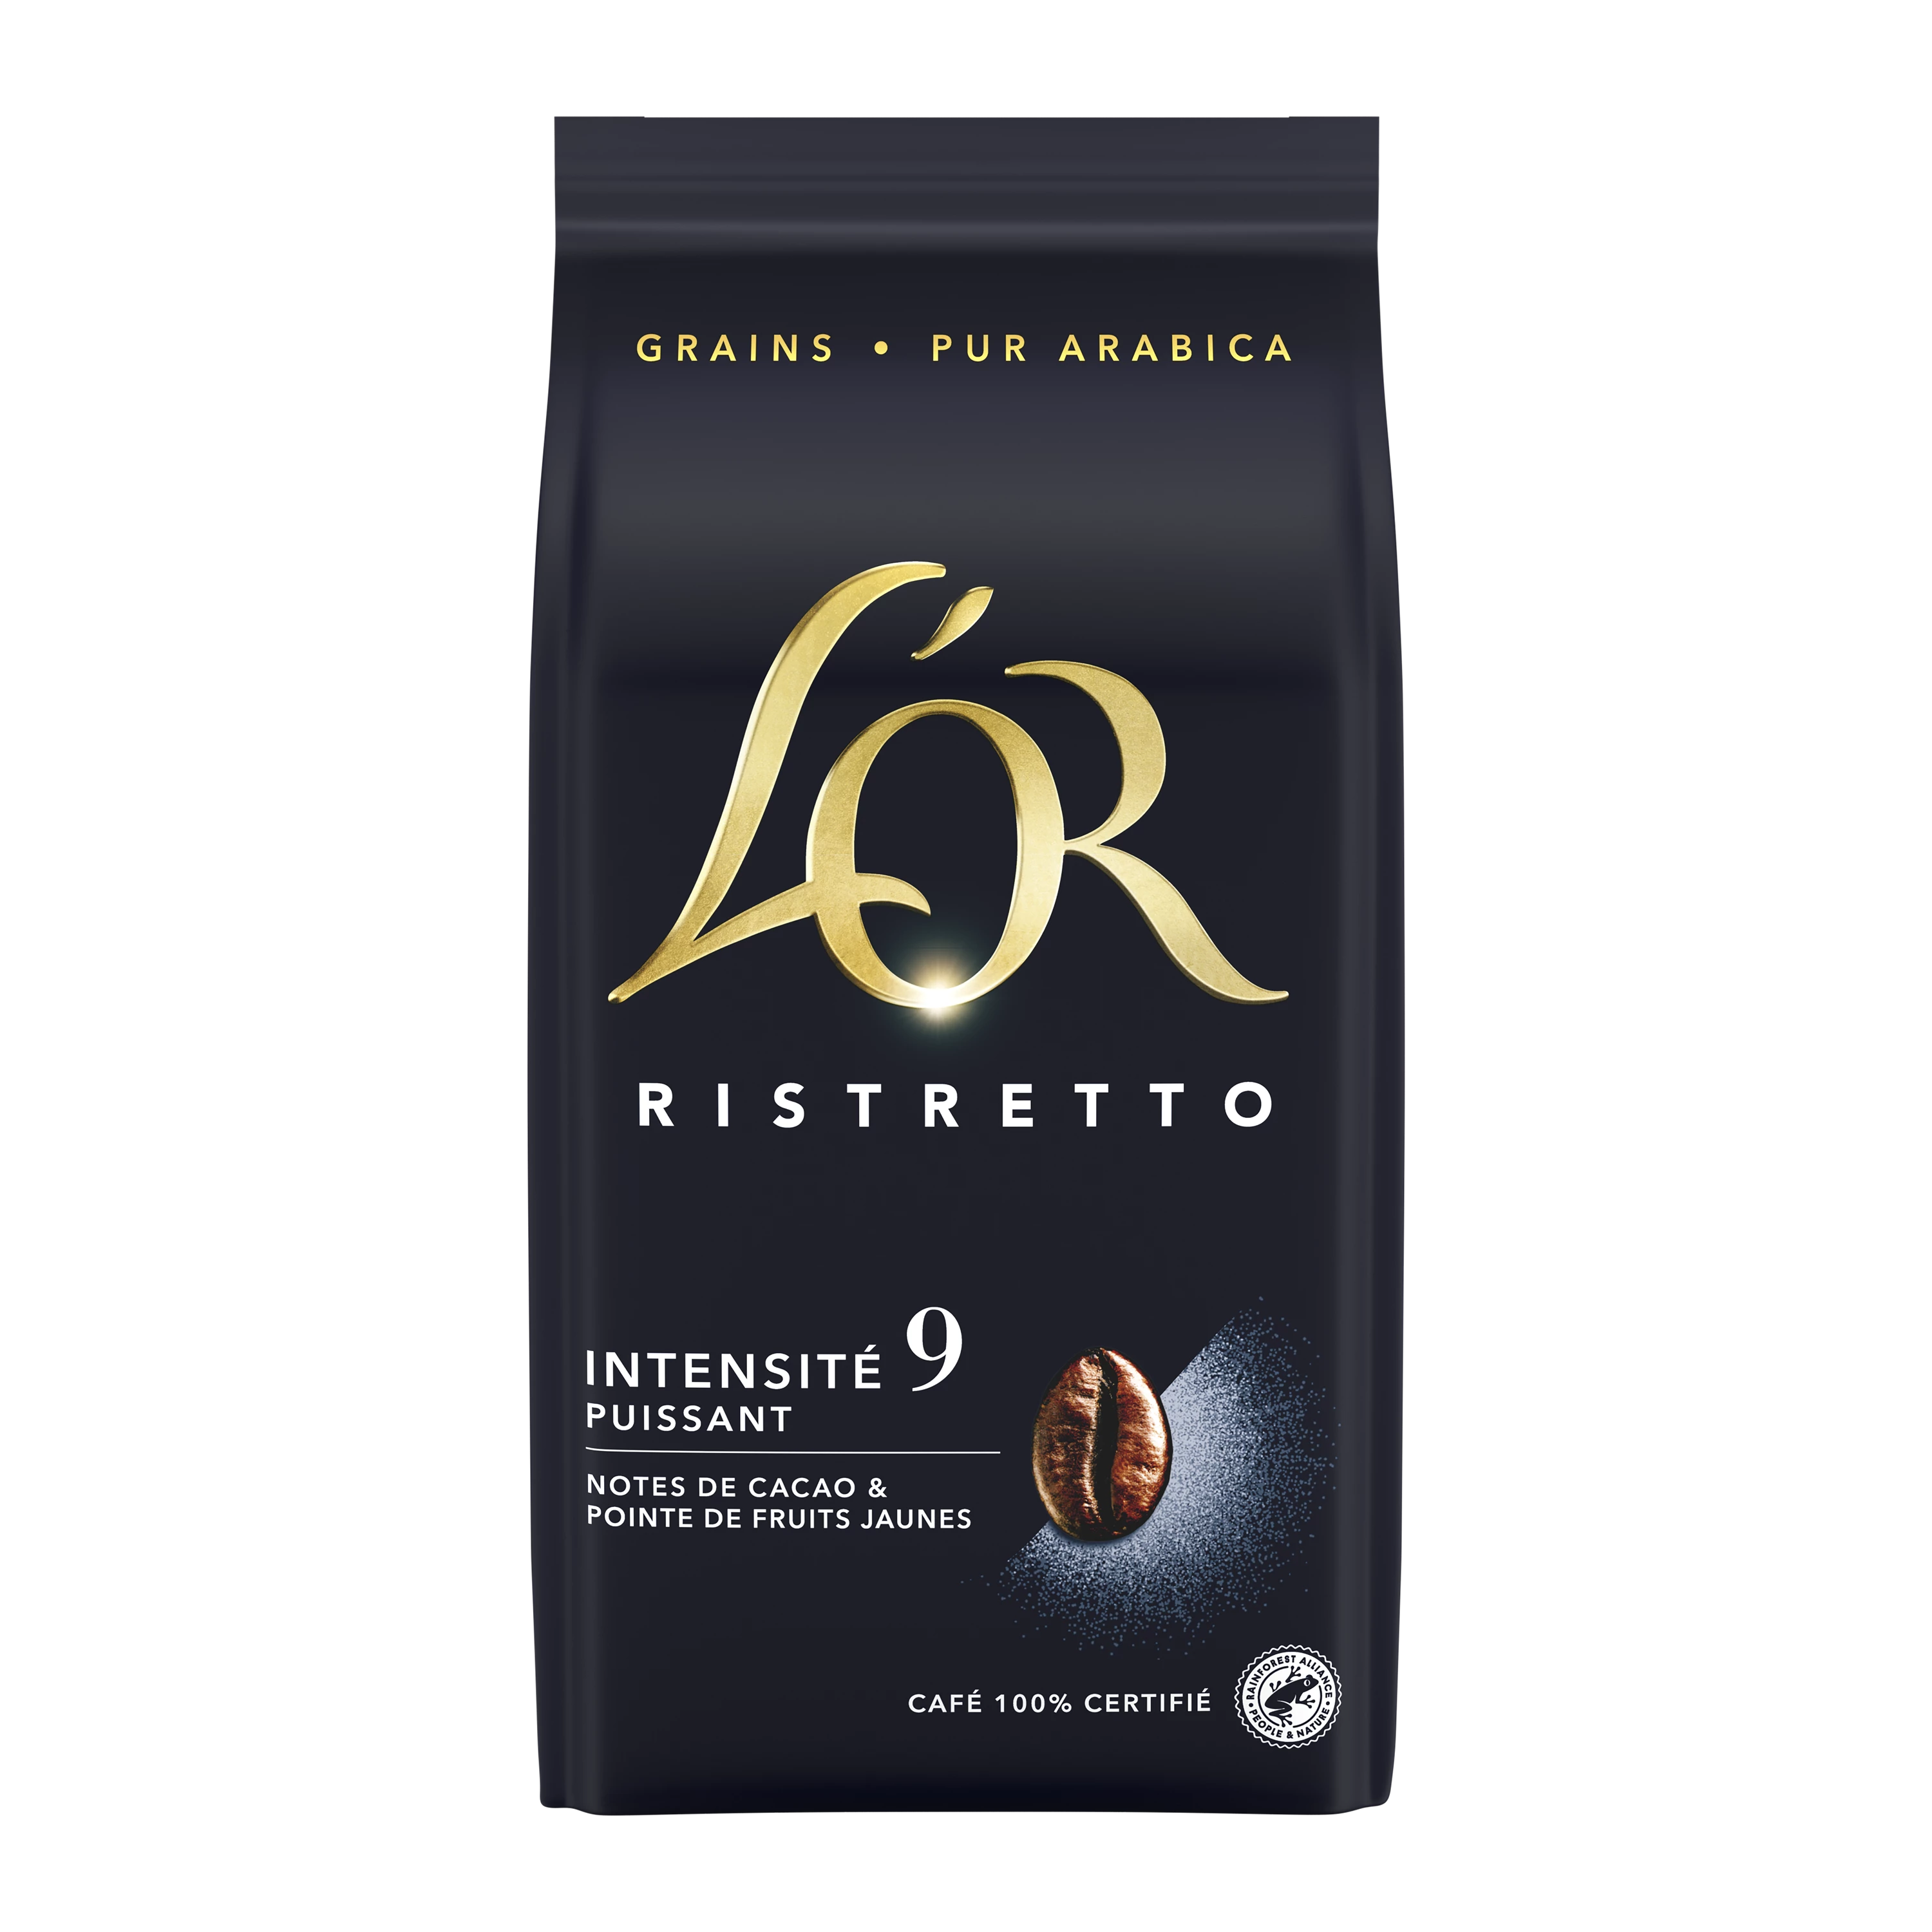 Ristretto Coffee Beans; 500g - L'OR